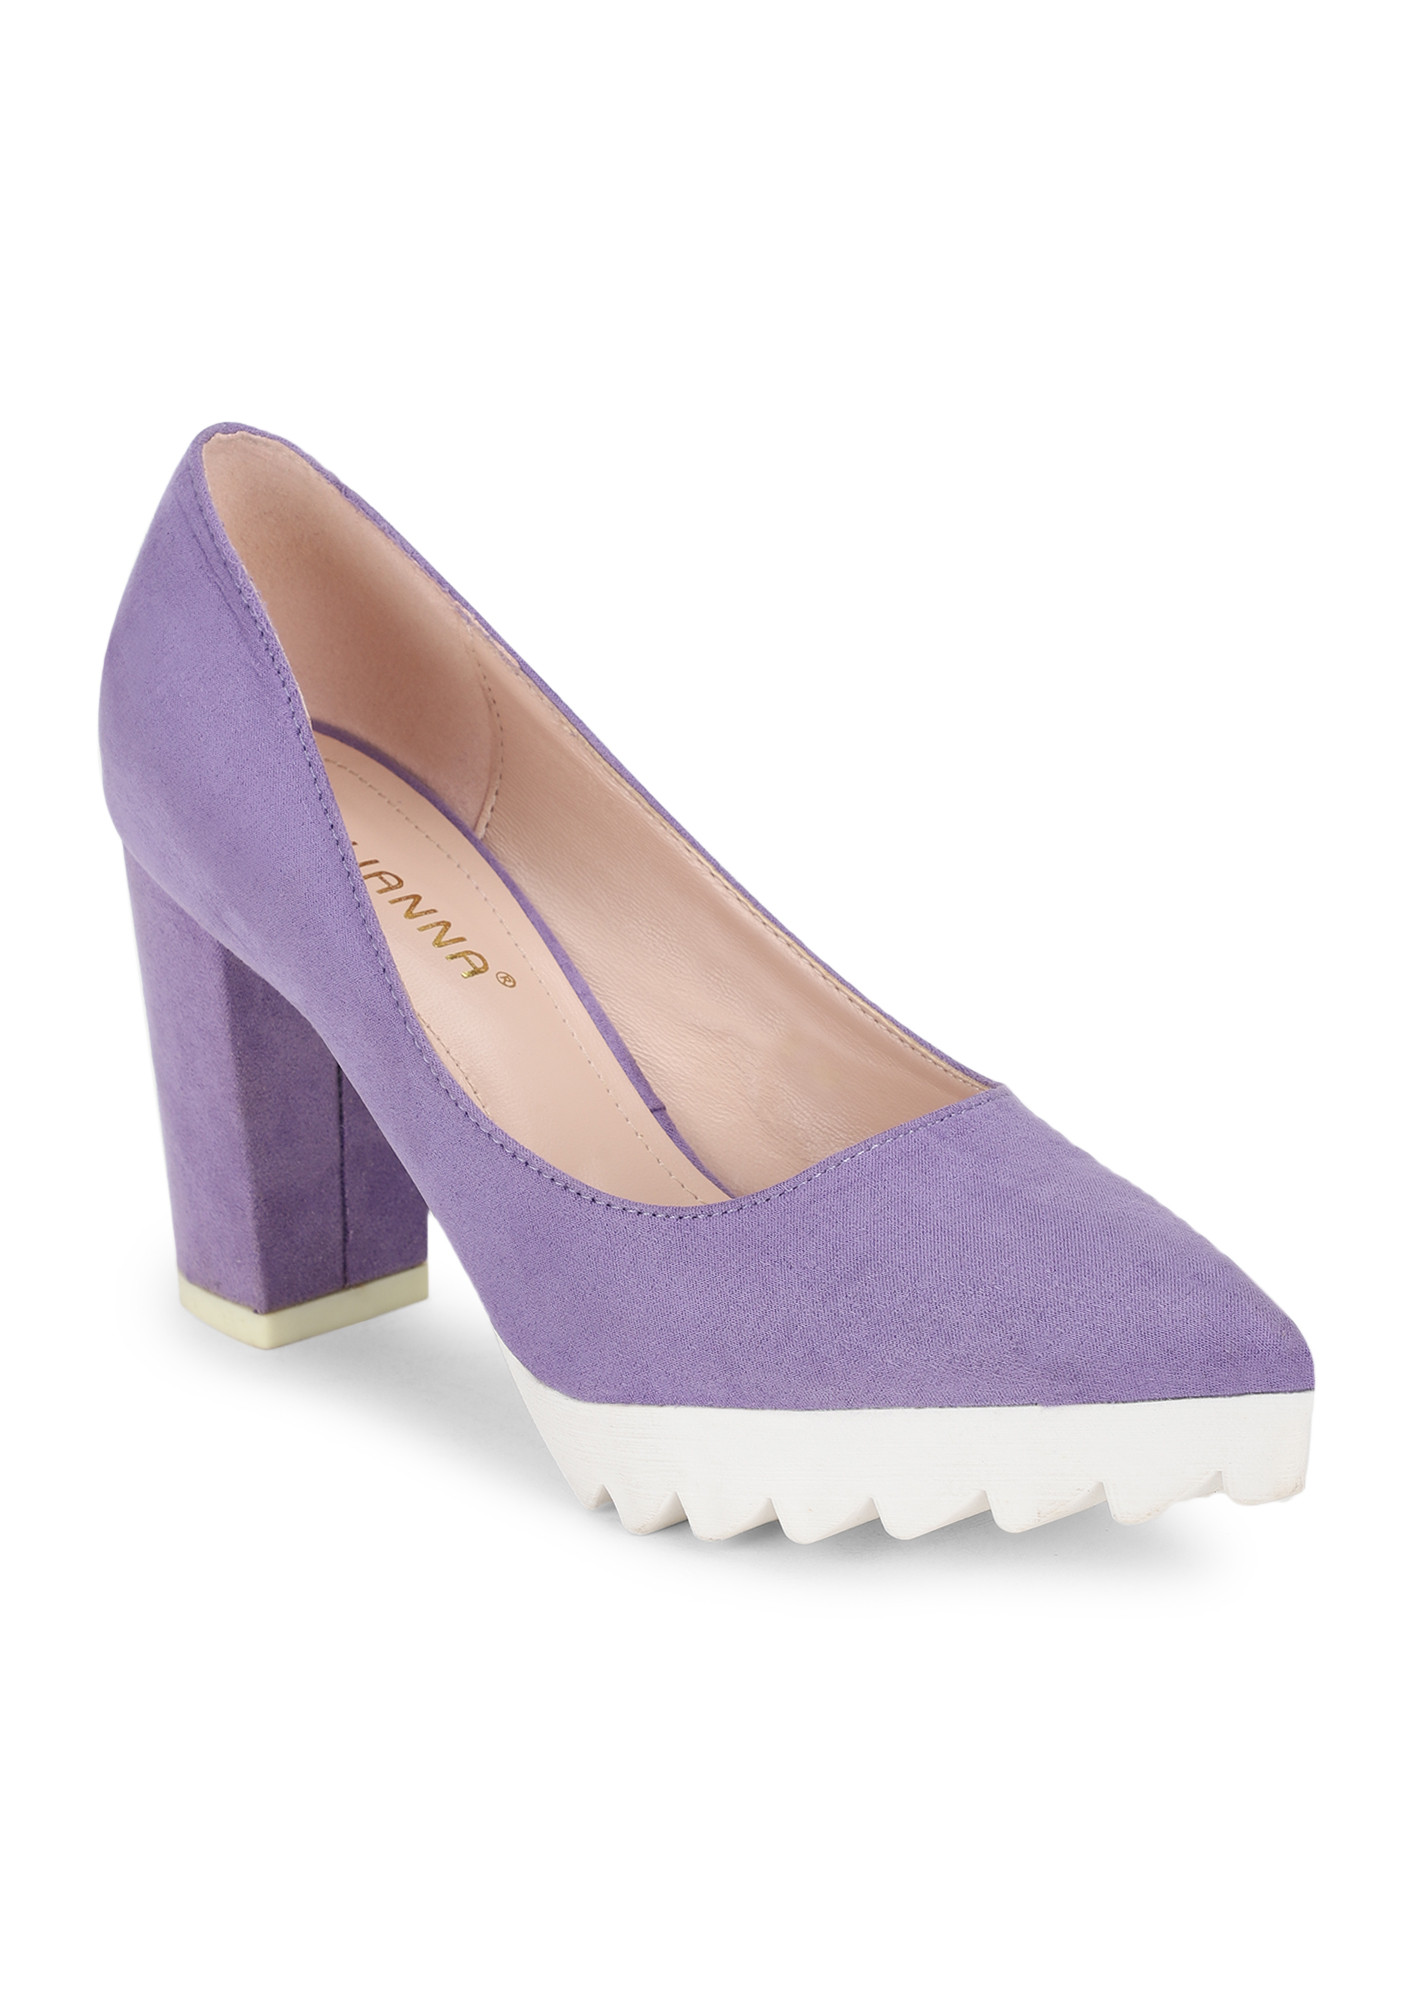 MAKING MOVES PURPLE POINTED PUMPS